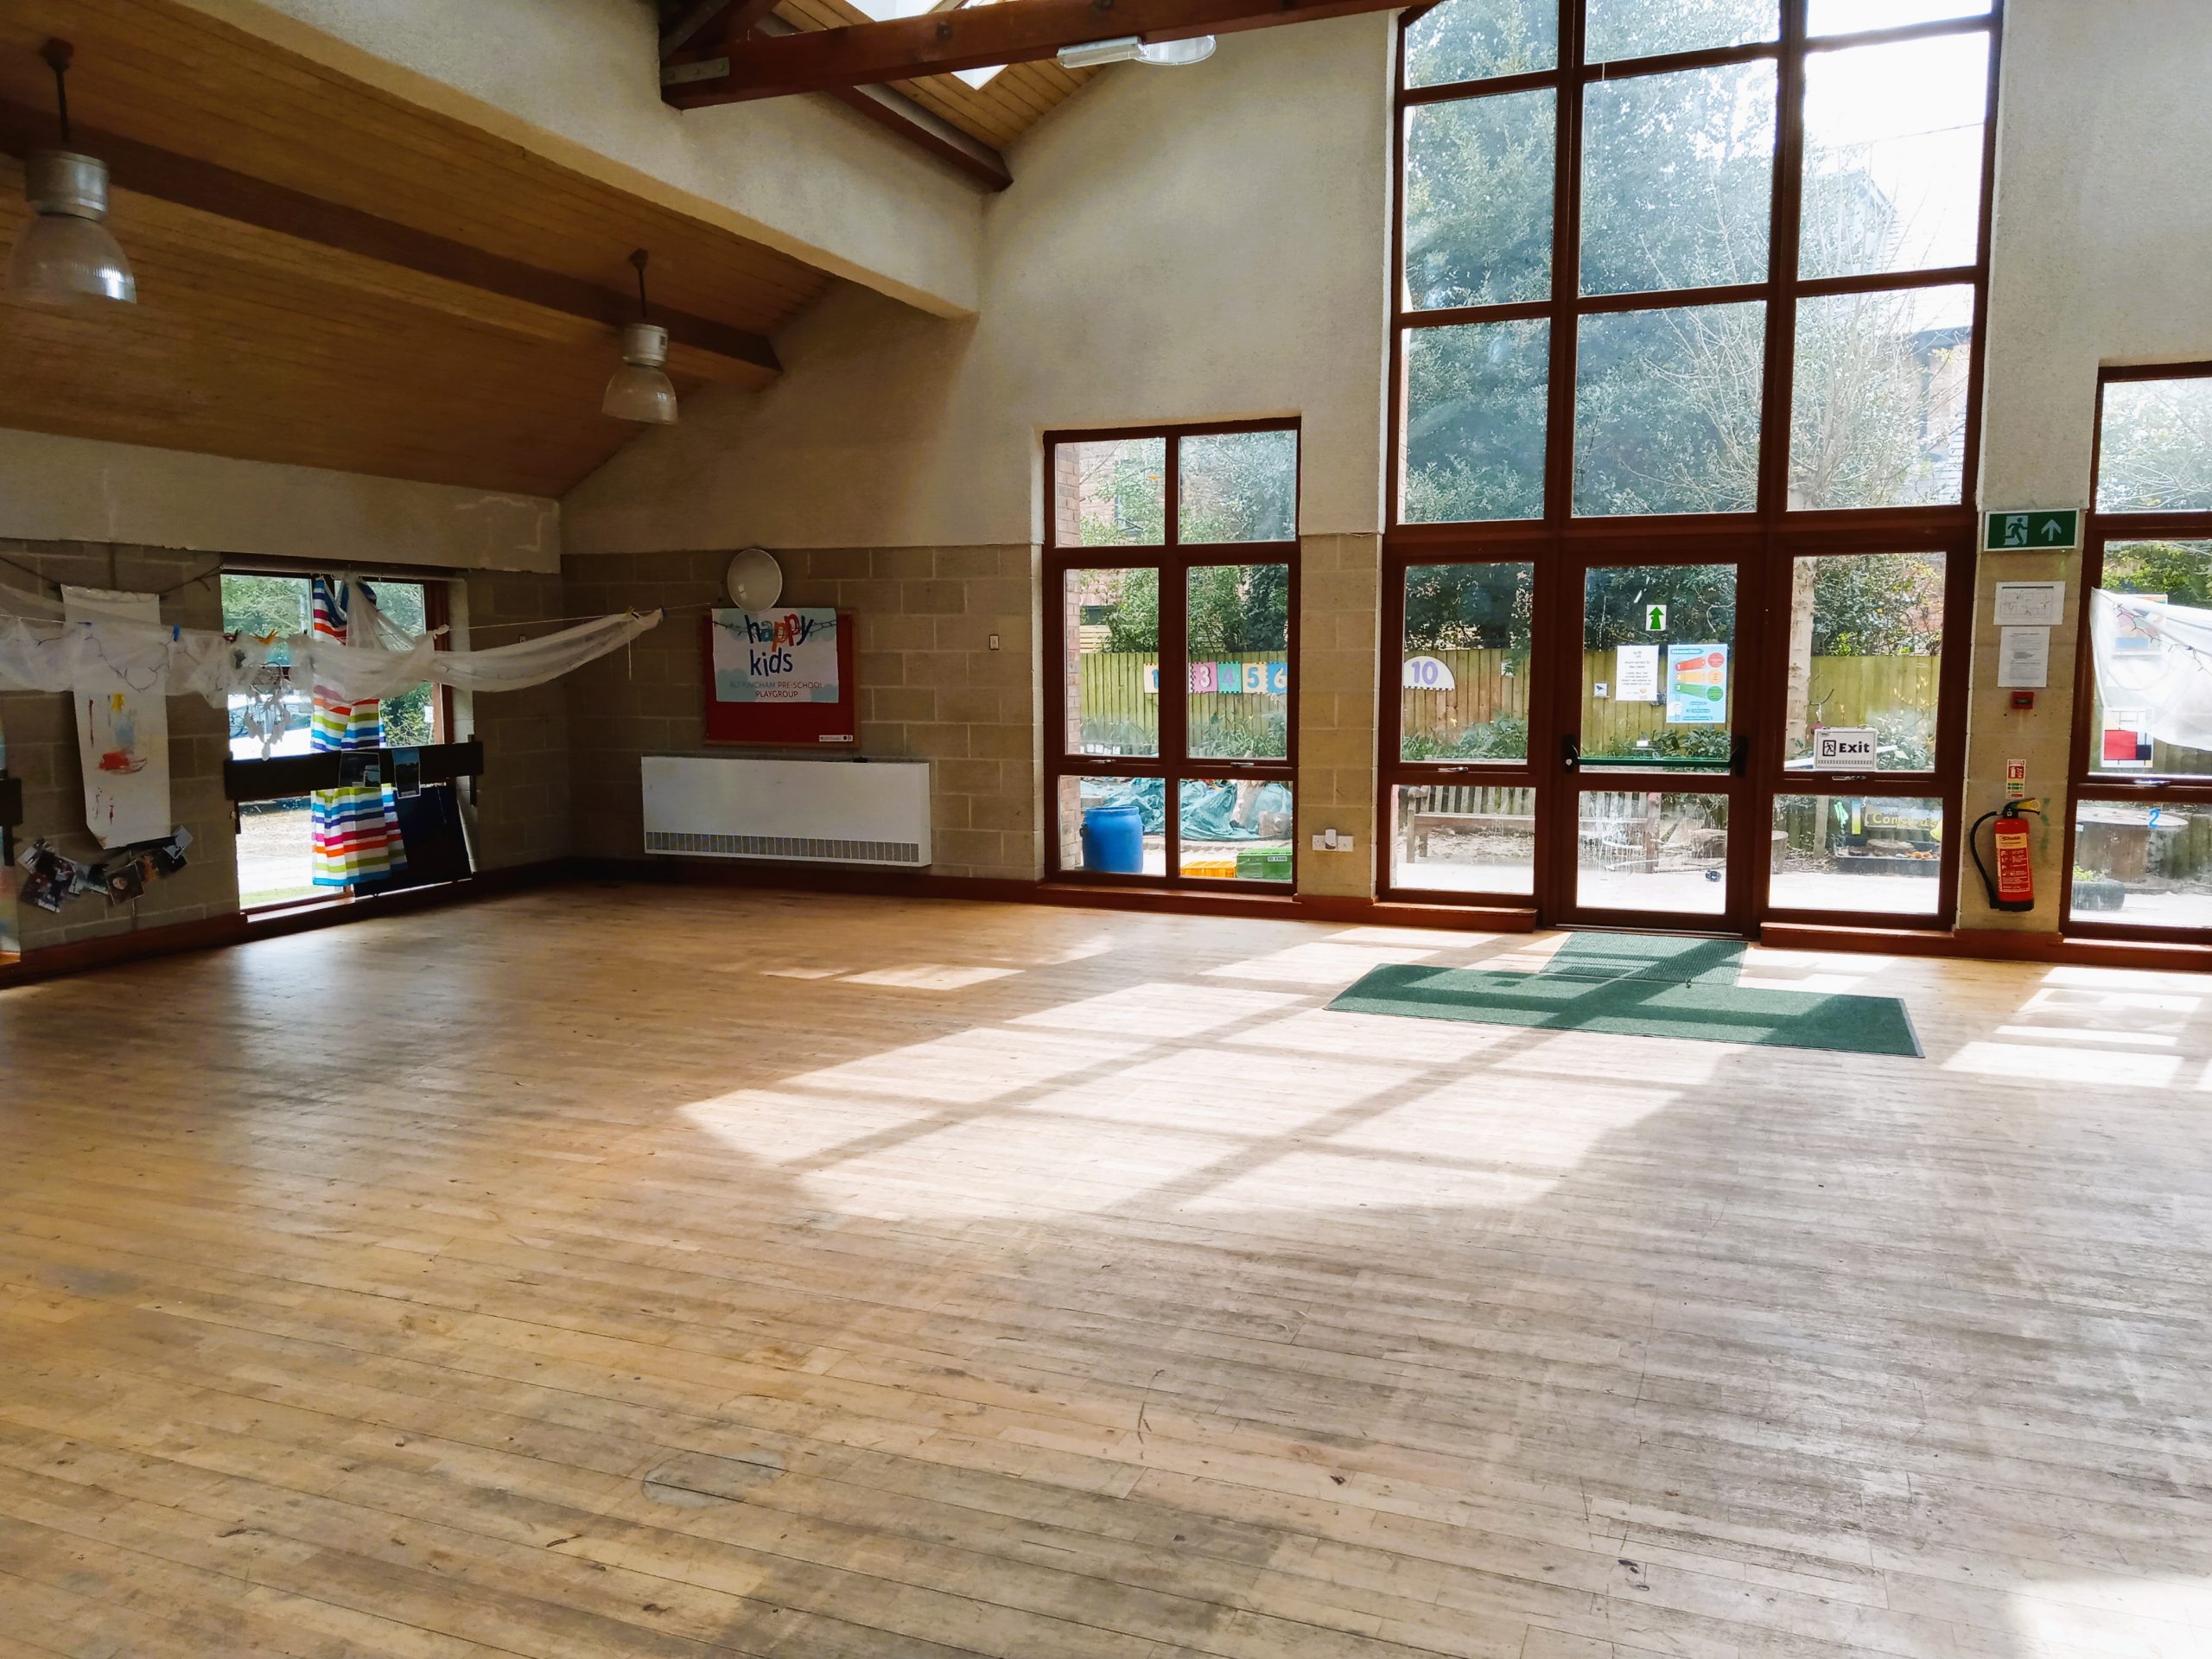 Picture showing the inside of the hall<br />
